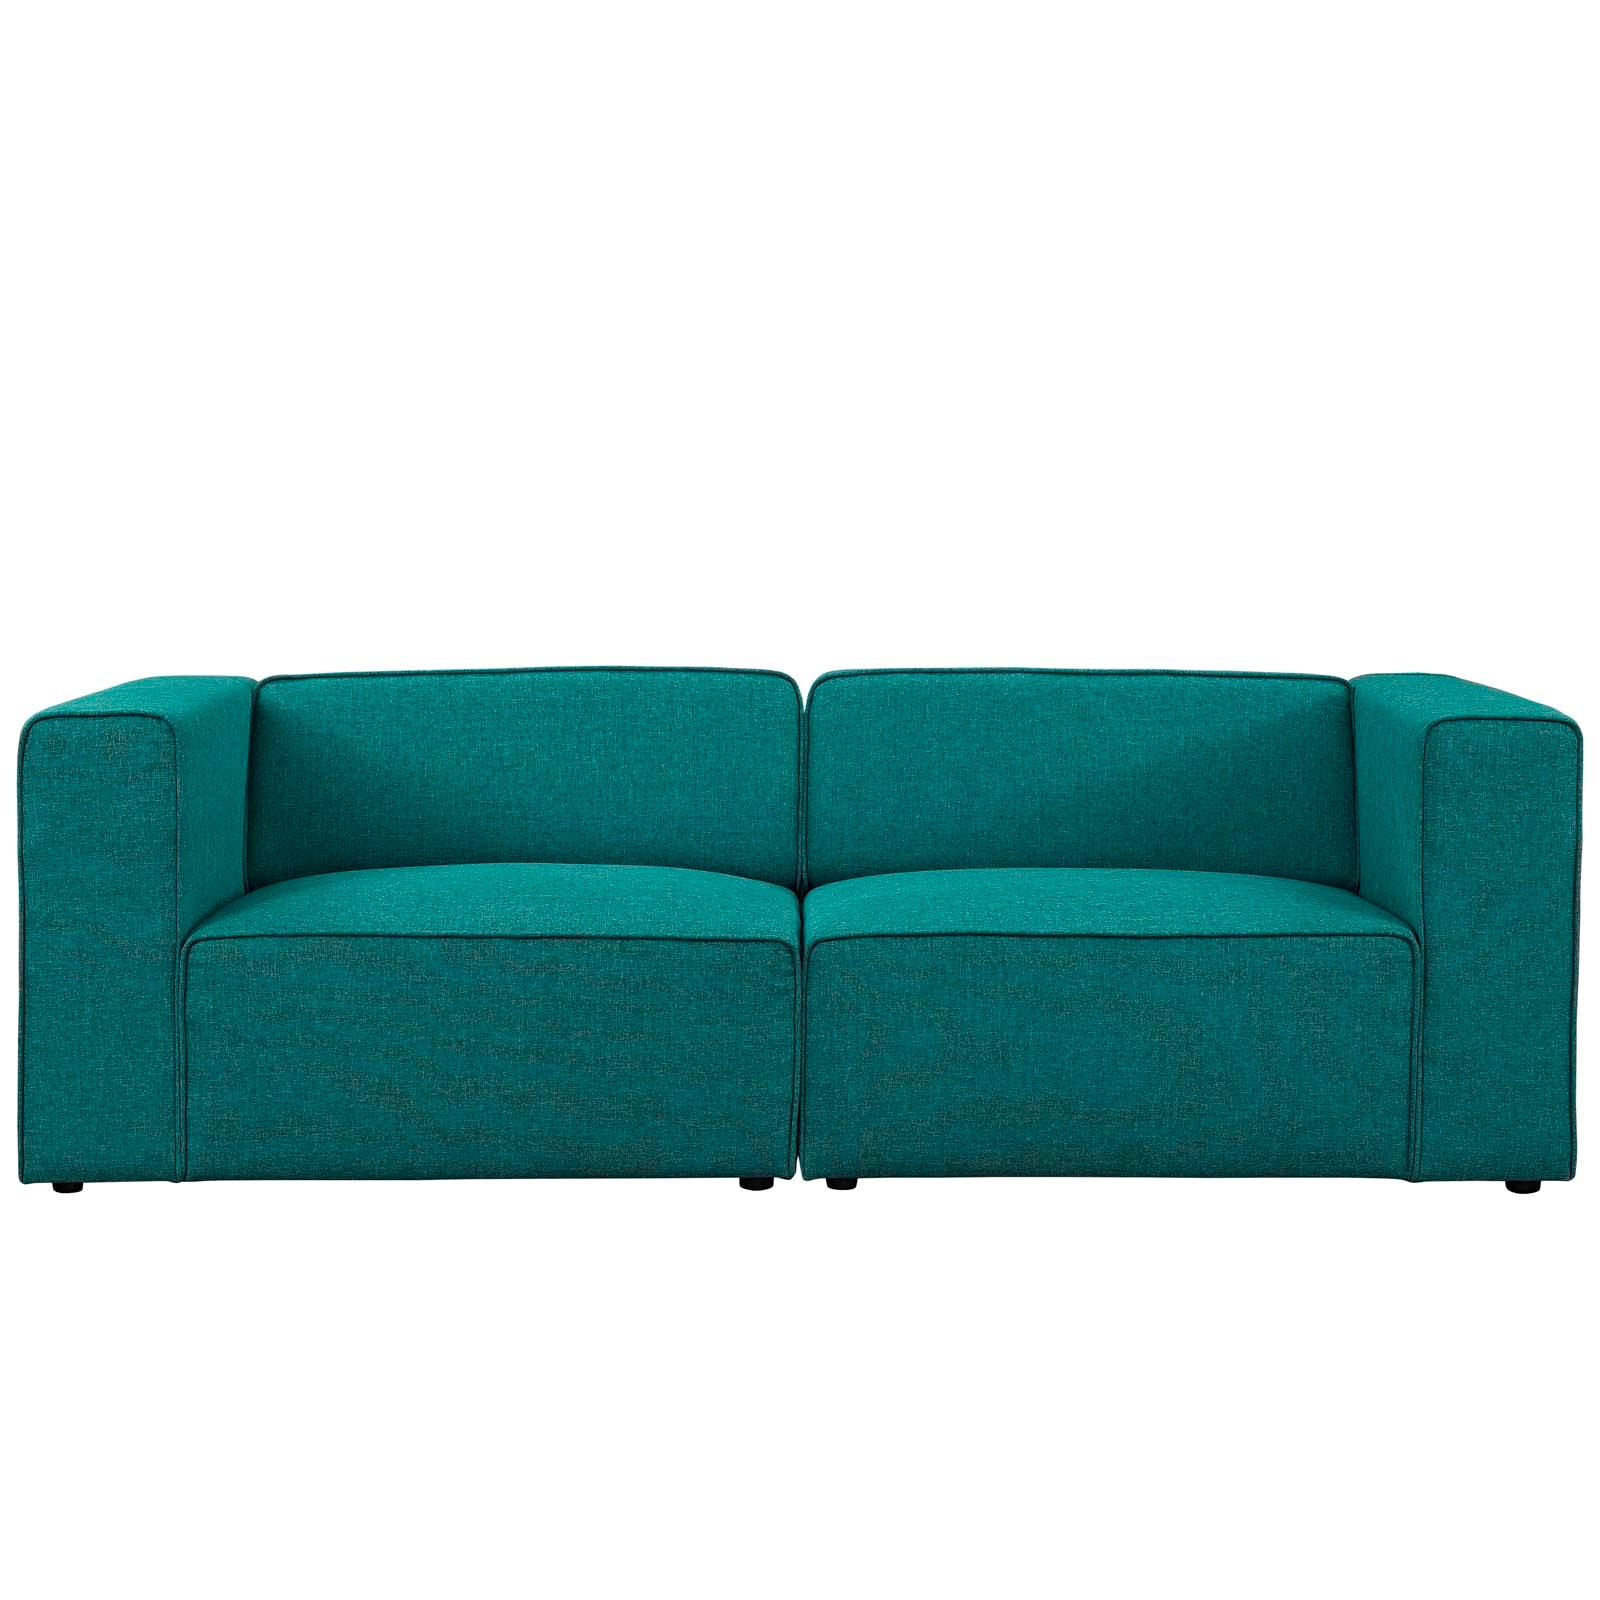 Modway Sectional Sofas - Mingle 2 Piece Upholstered Fabric Sectional Sofa Set Teal